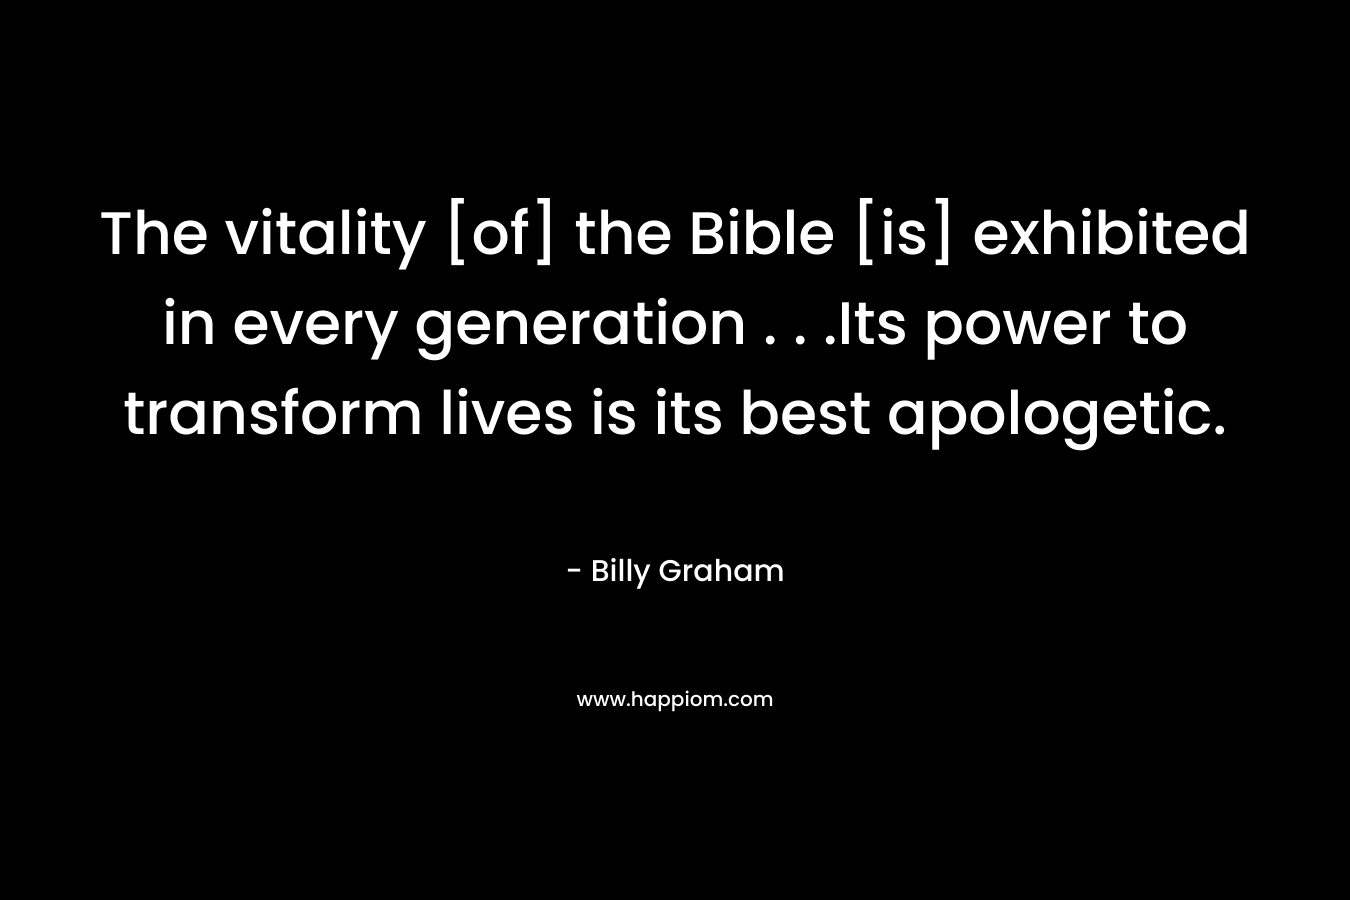 The vitality [of] the Bible [is] exhibited in every generation . . .Its power to transform lives is its best apologetic.